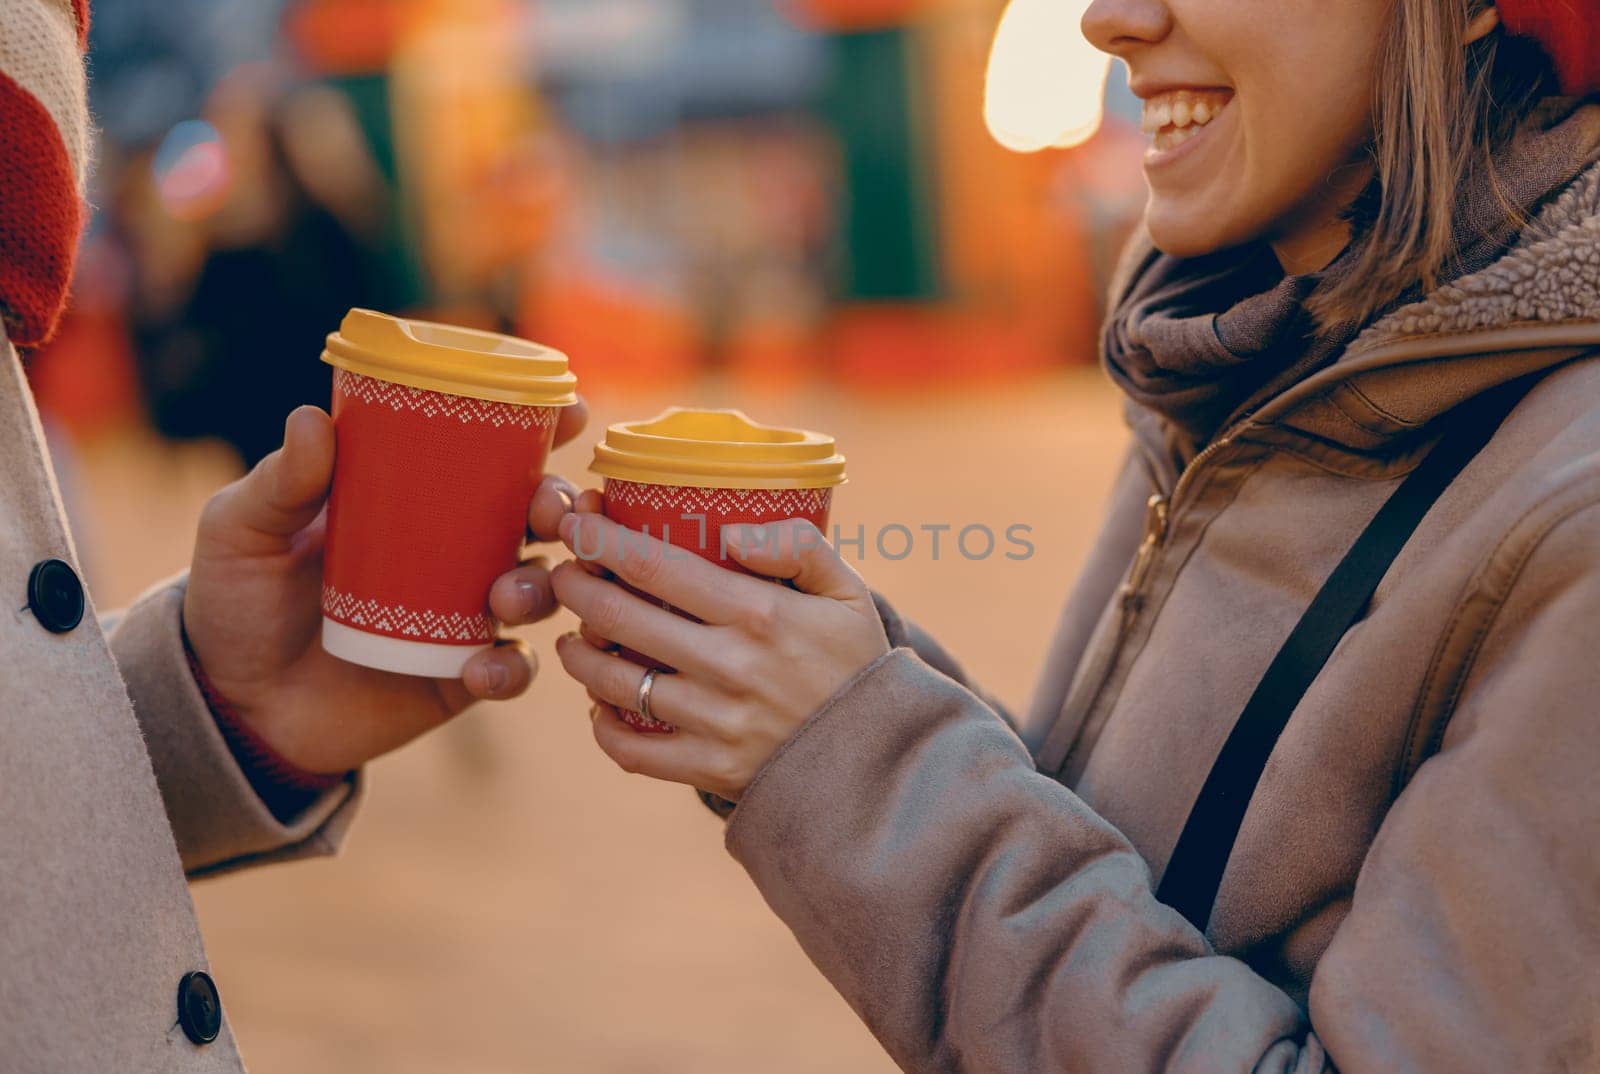 Couple sharing a joyful moment with hot drinks in festive cups at a Christmas market by Yaroslav_astakhov